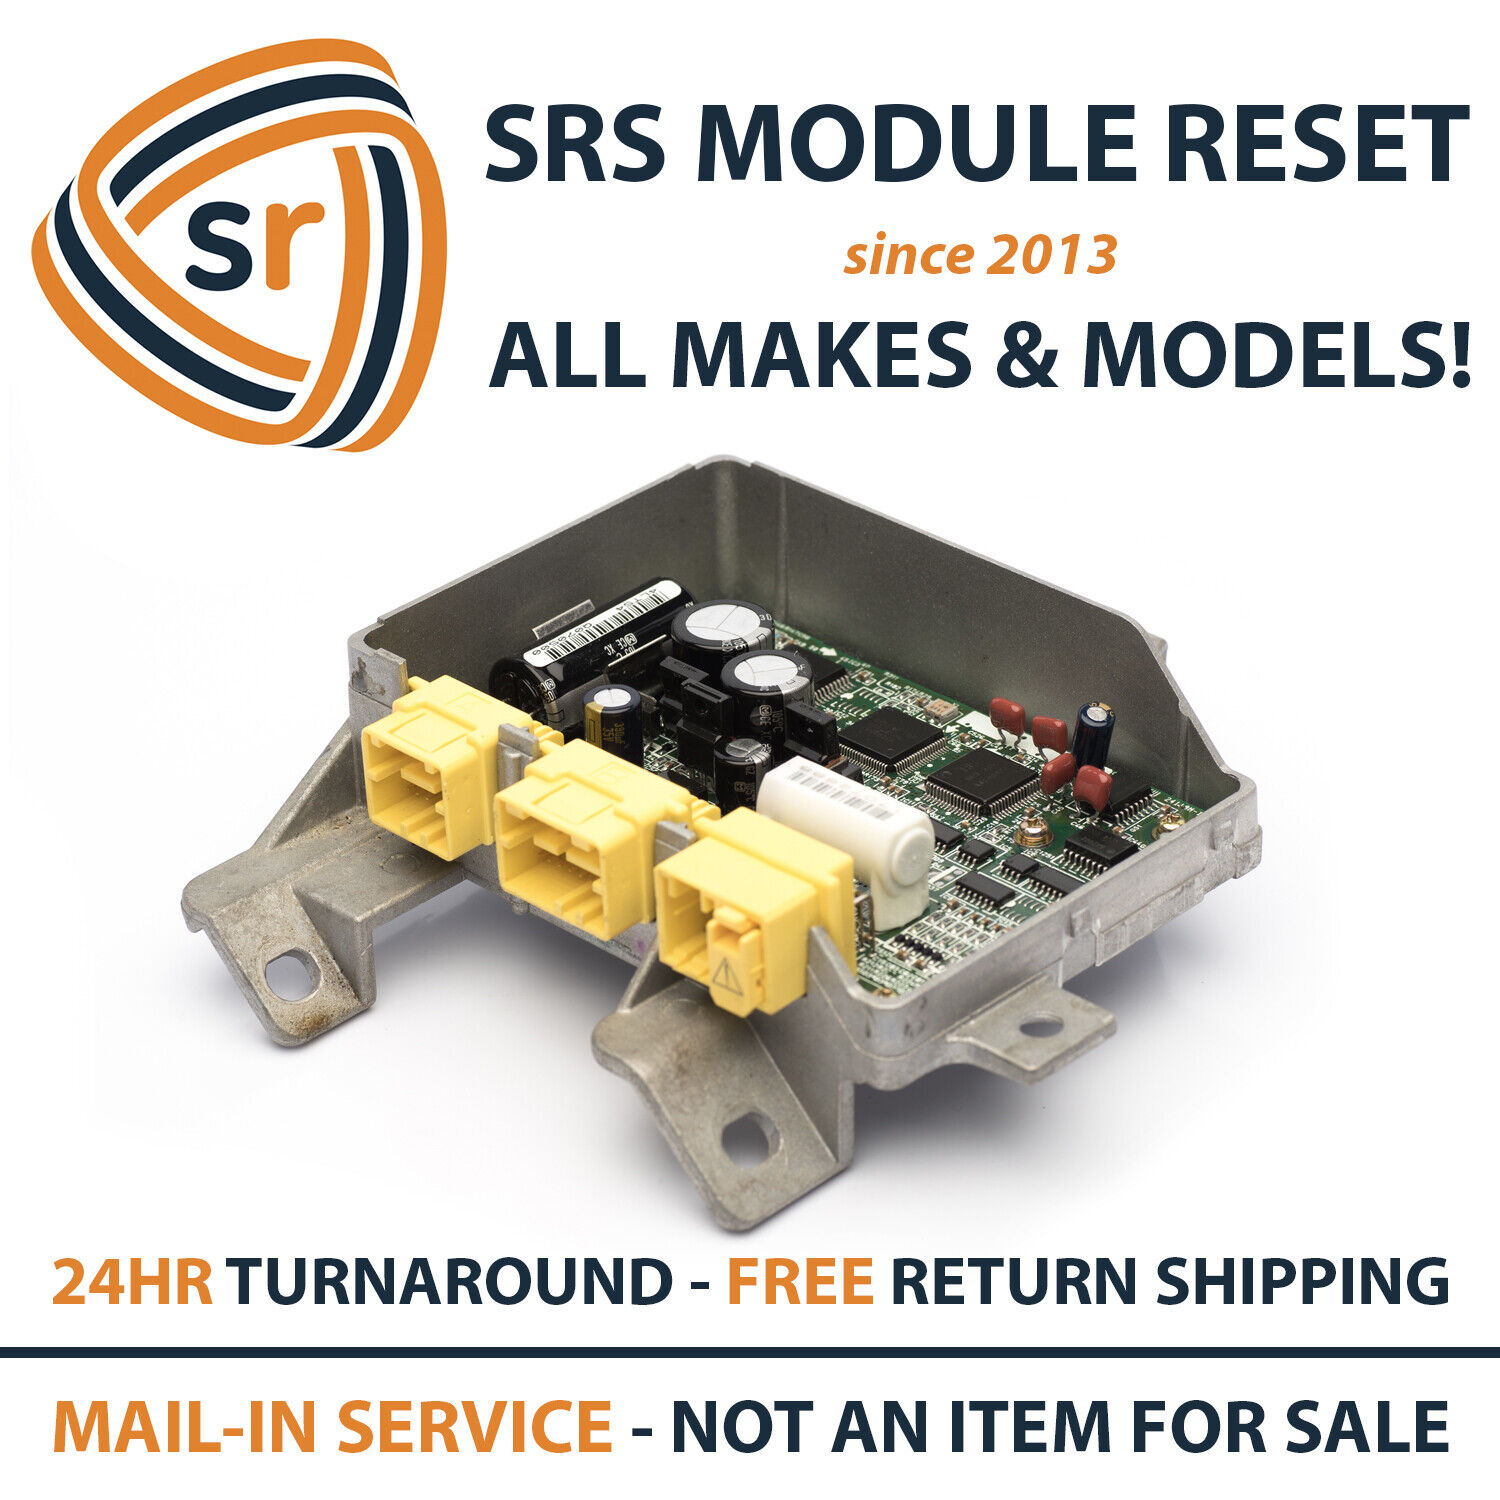 ⭐For All LINCOLN Module Reset SRS Unit Crash Code Clear #1 in USA⭐